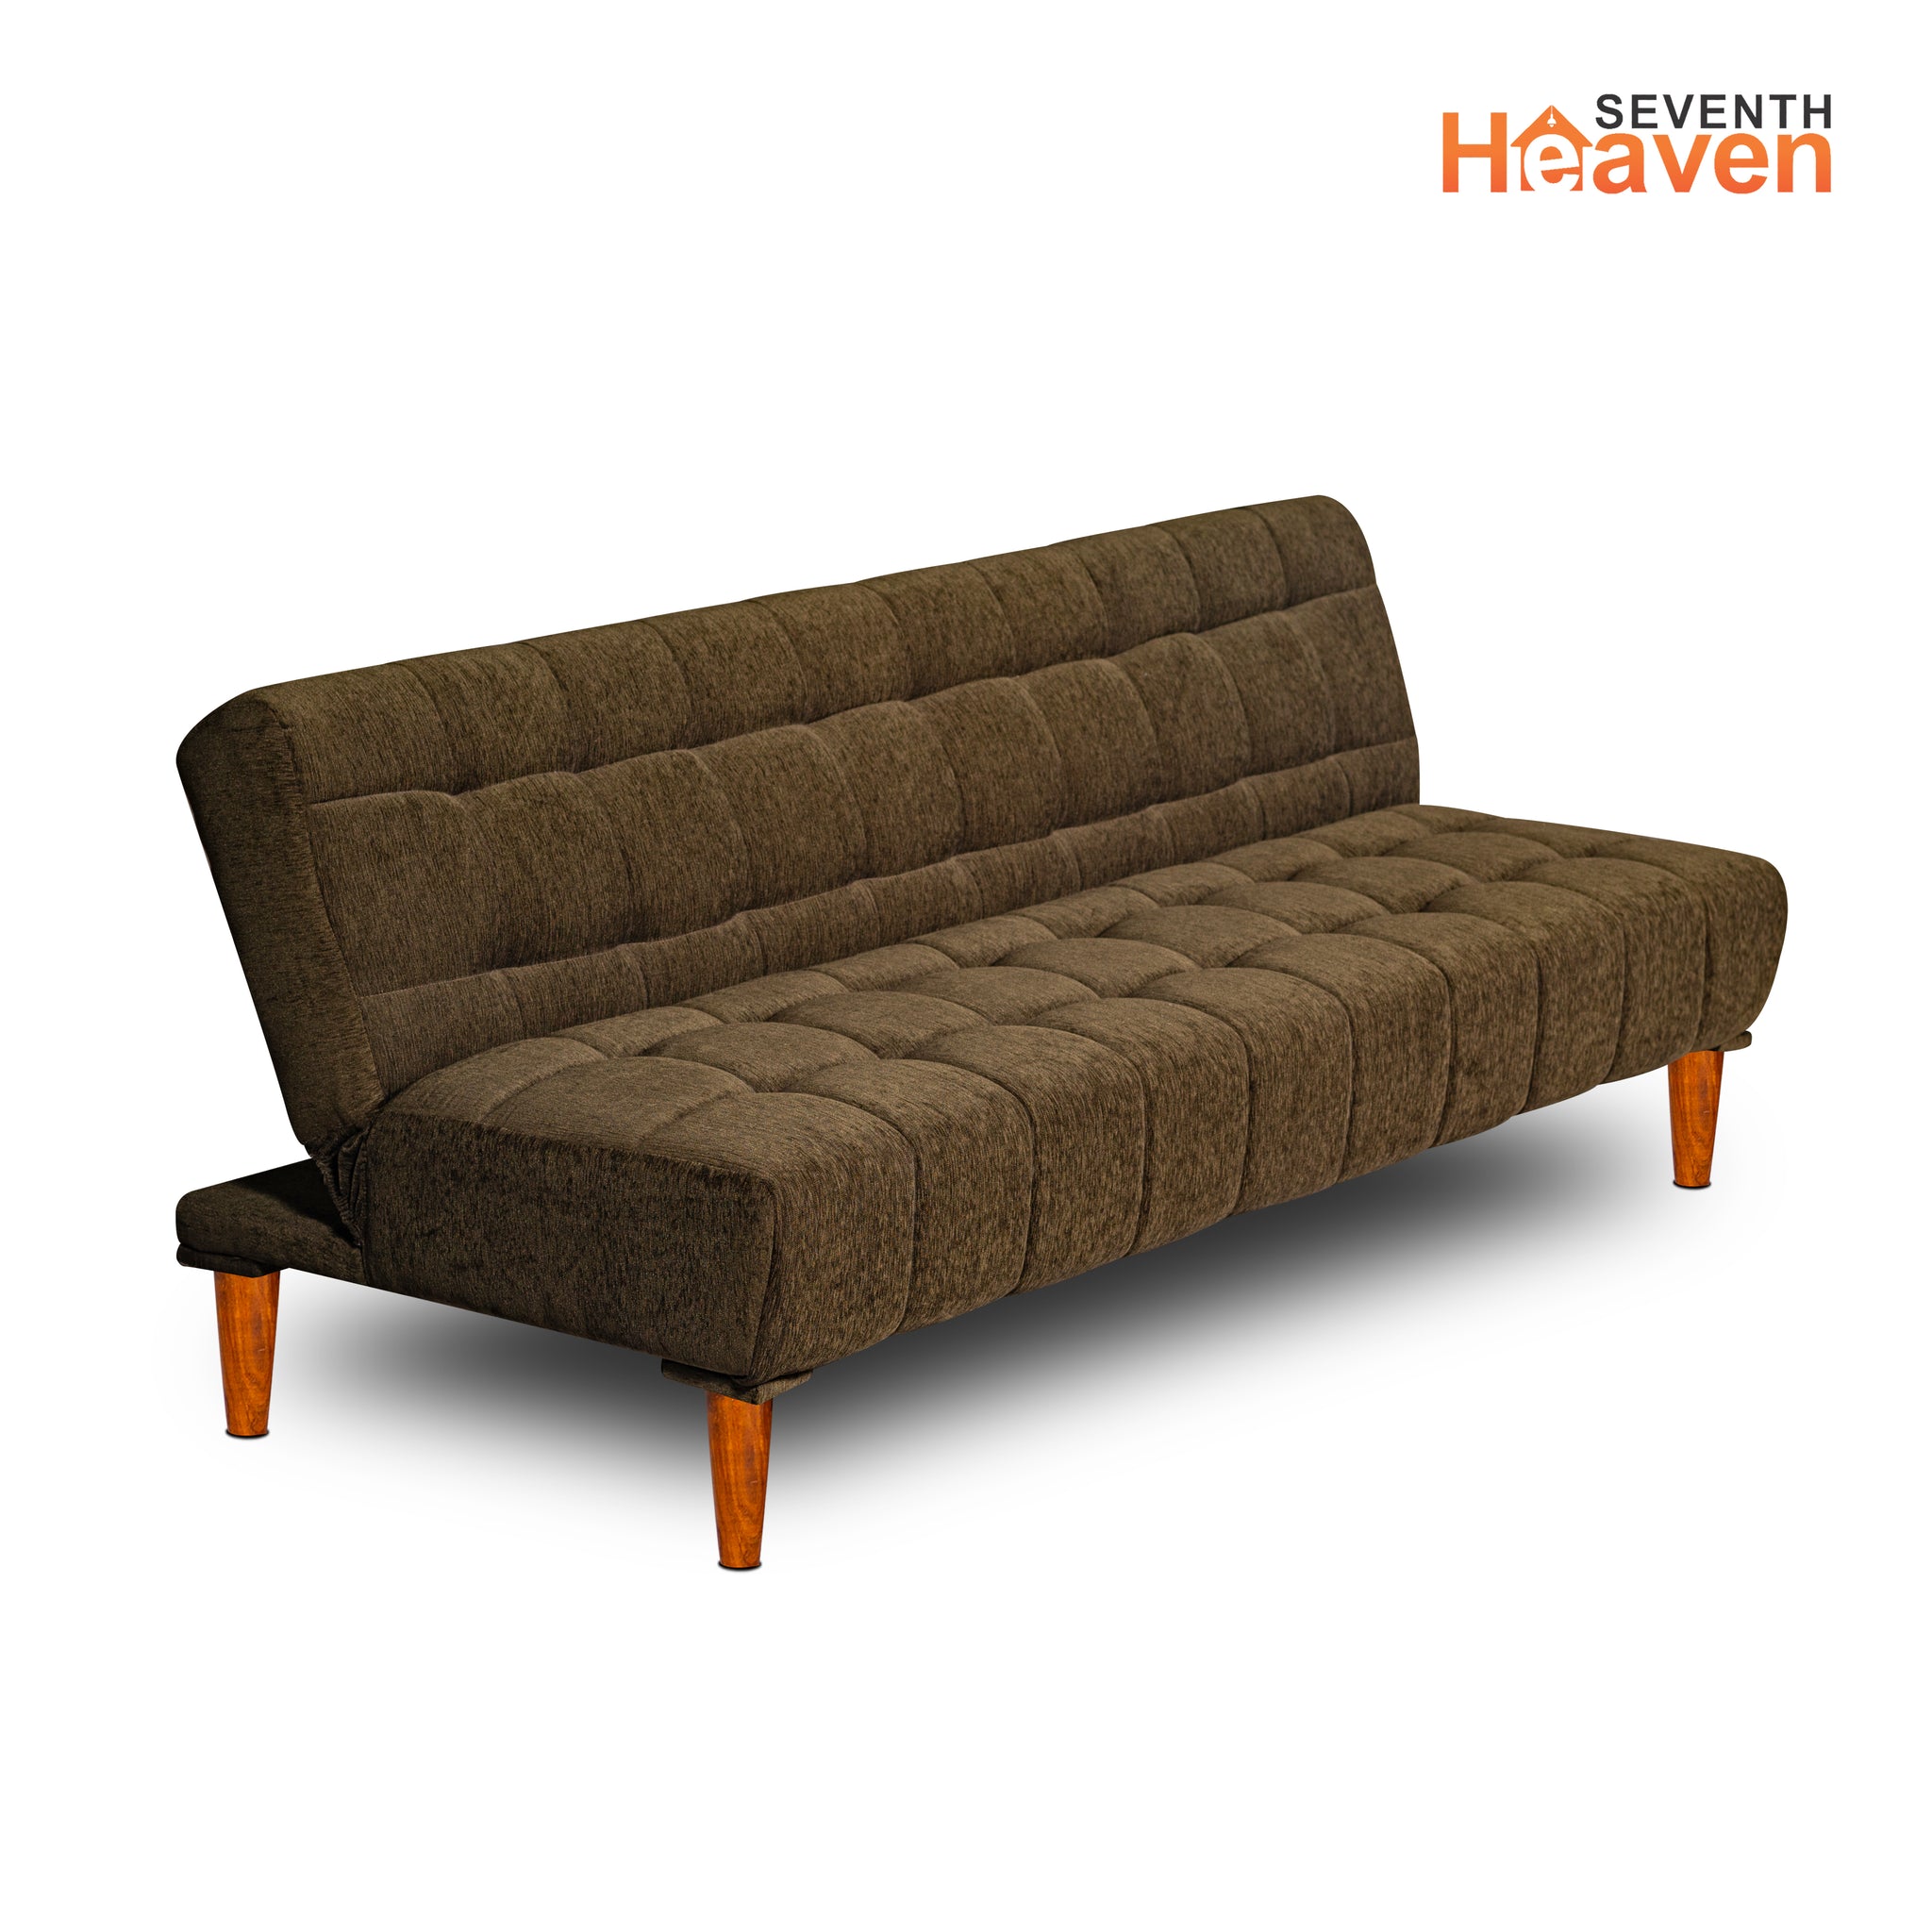 Seventh Heaven Florida Neo 4 Seater Wooden Sofa Cum Bed Modern & Elegant Smart Furniture Range for luxurious homes, living rooms and offices. Use as a sofa, lounger or bed. Perfect for guests. Molphino fabric with sheesham polished wooden legs. Green colour.